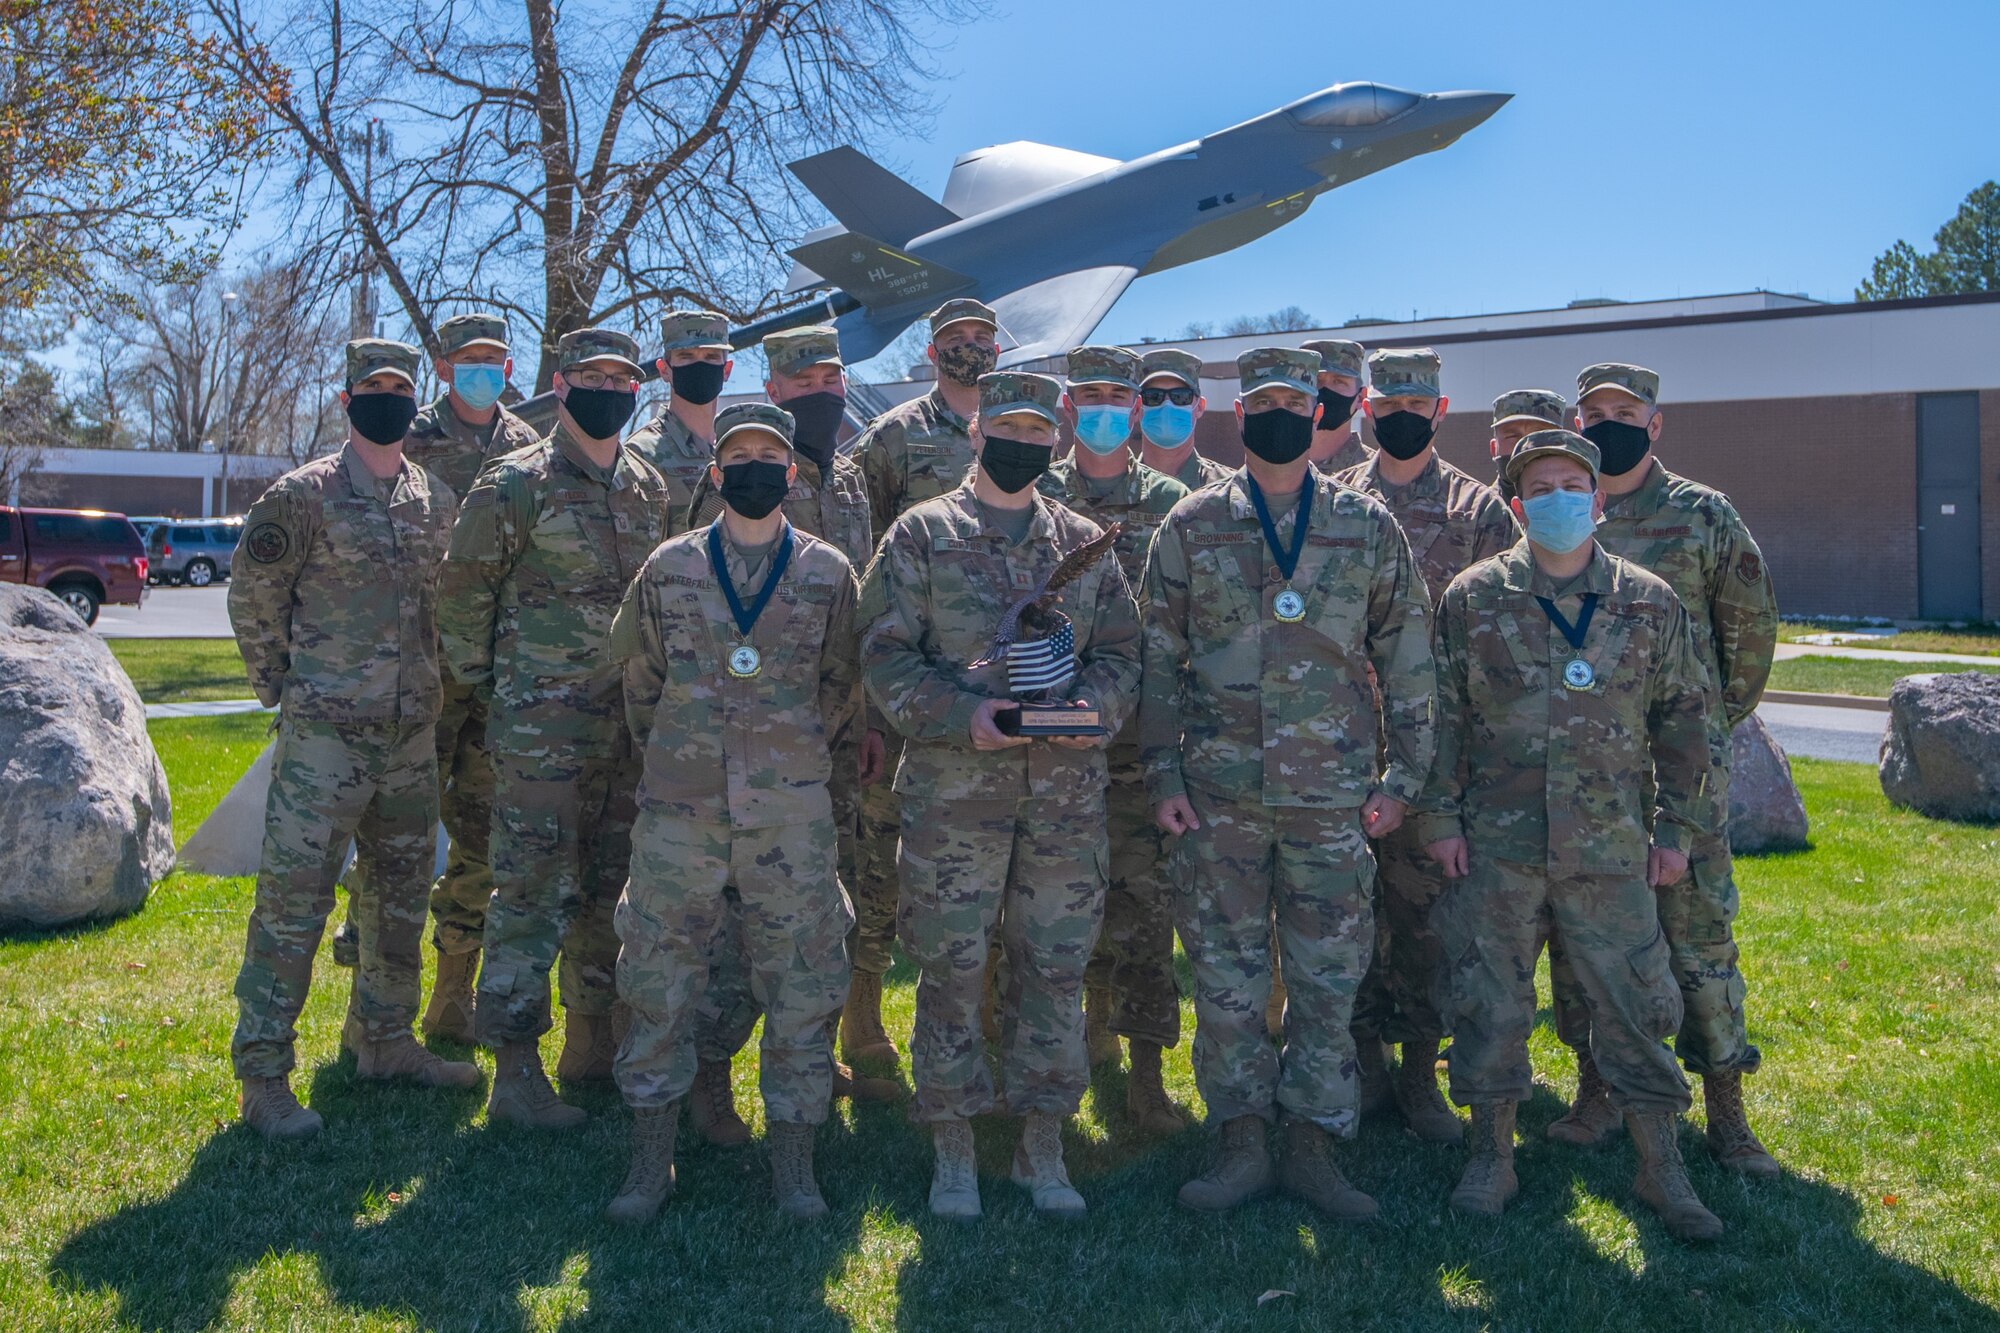 Reservists in the 419th Civil Engineer Squadron’s operations flight pose April 11, 2021, at Hill Air Force Base, Utah. The group was named Team of the Year during the 419th Fighter Wing’s annual awards ceremony during April’s unit training assembly.